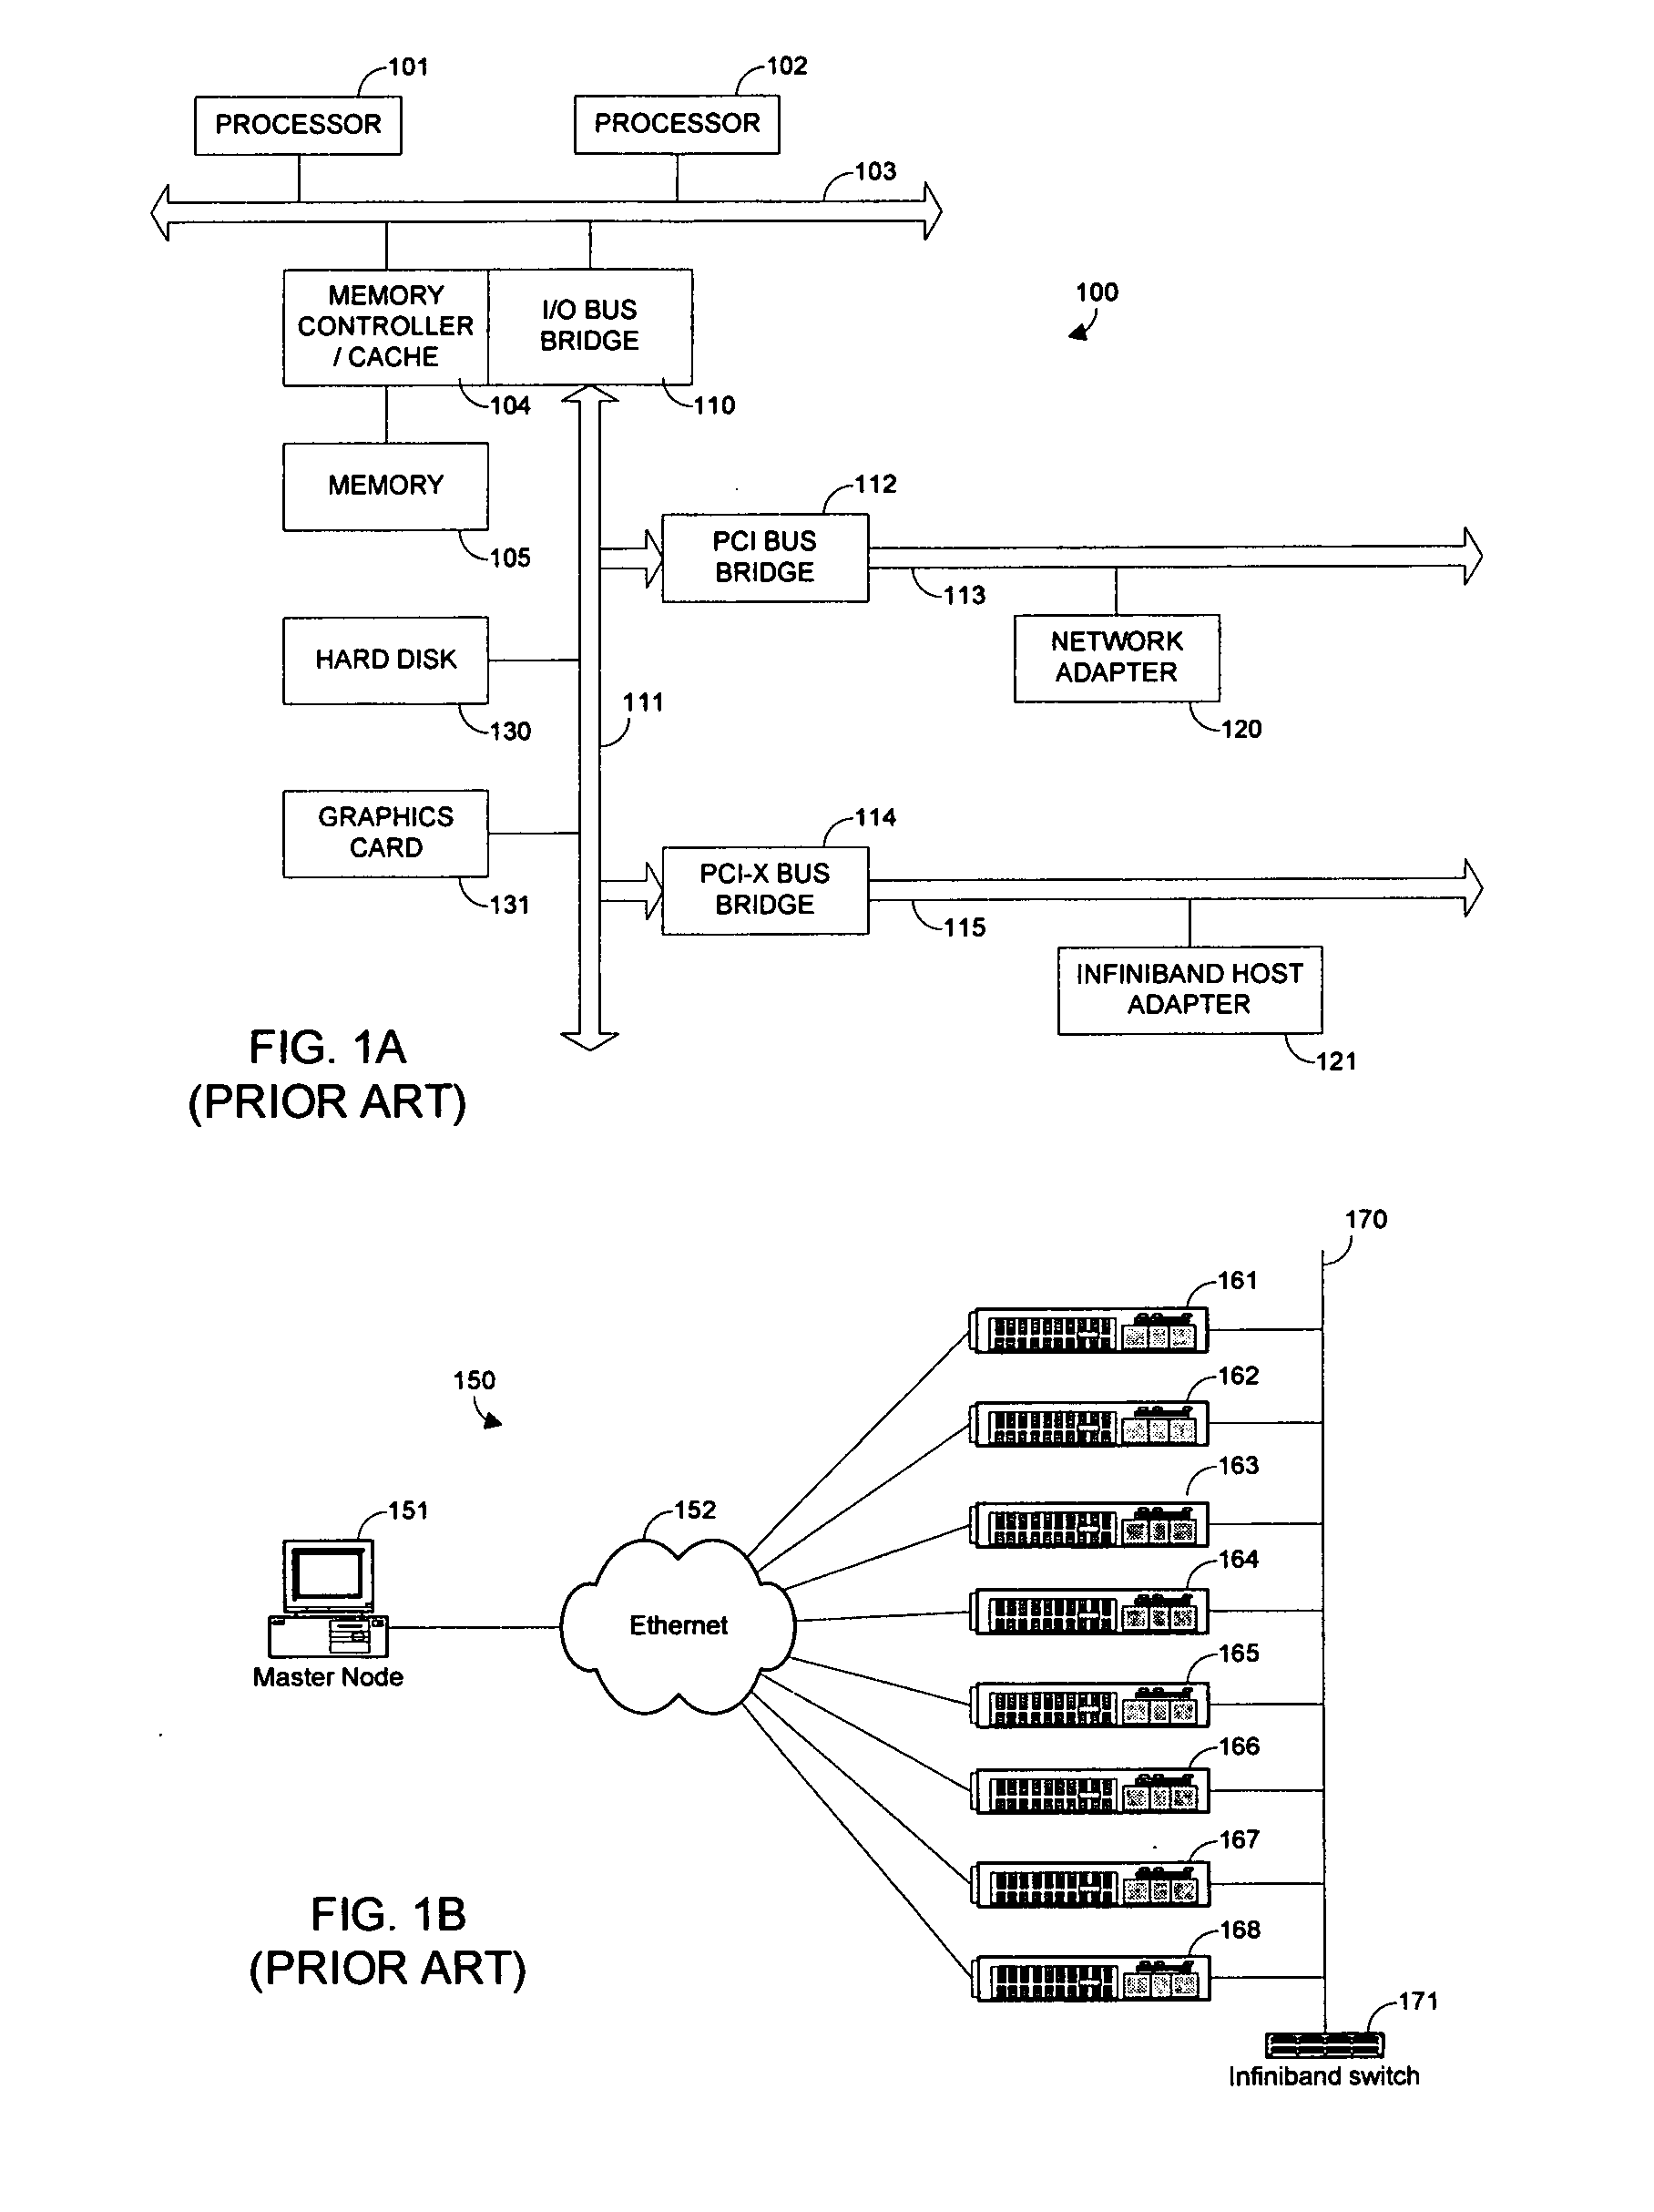 Apparatus, method and system for aggregrating computing resources